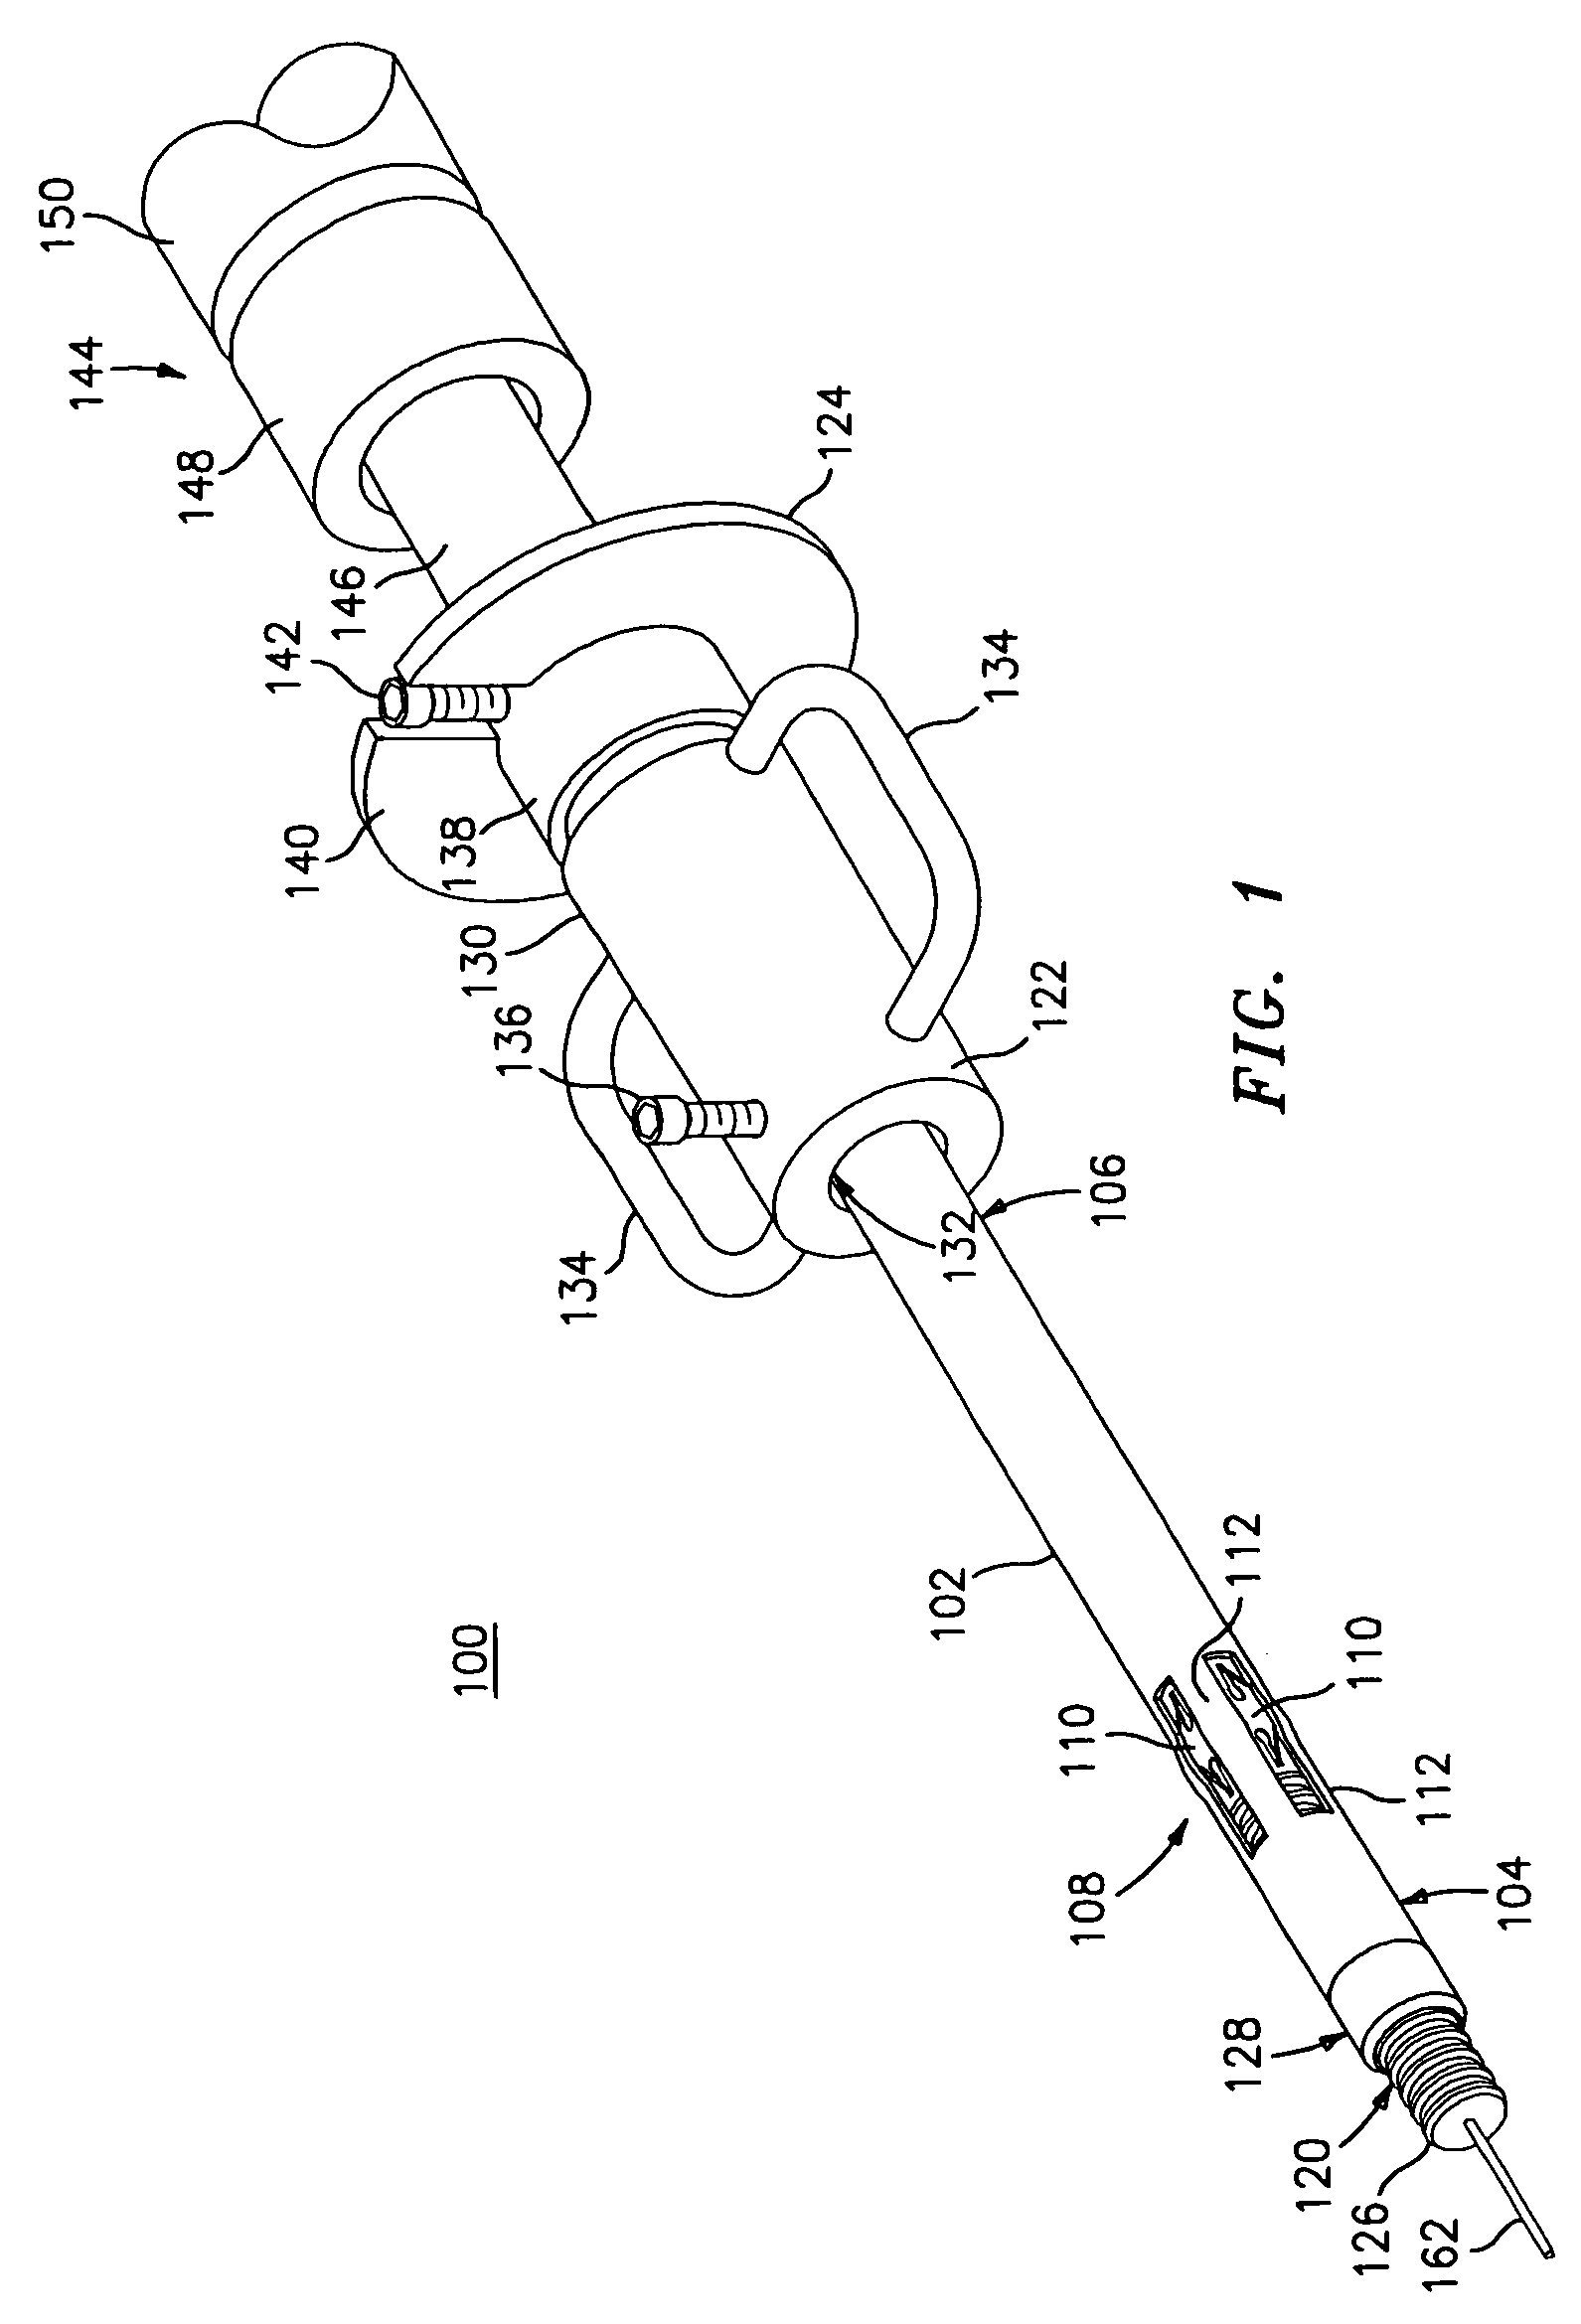 Method and apparatus for anastomosis including an anchoring sleeve